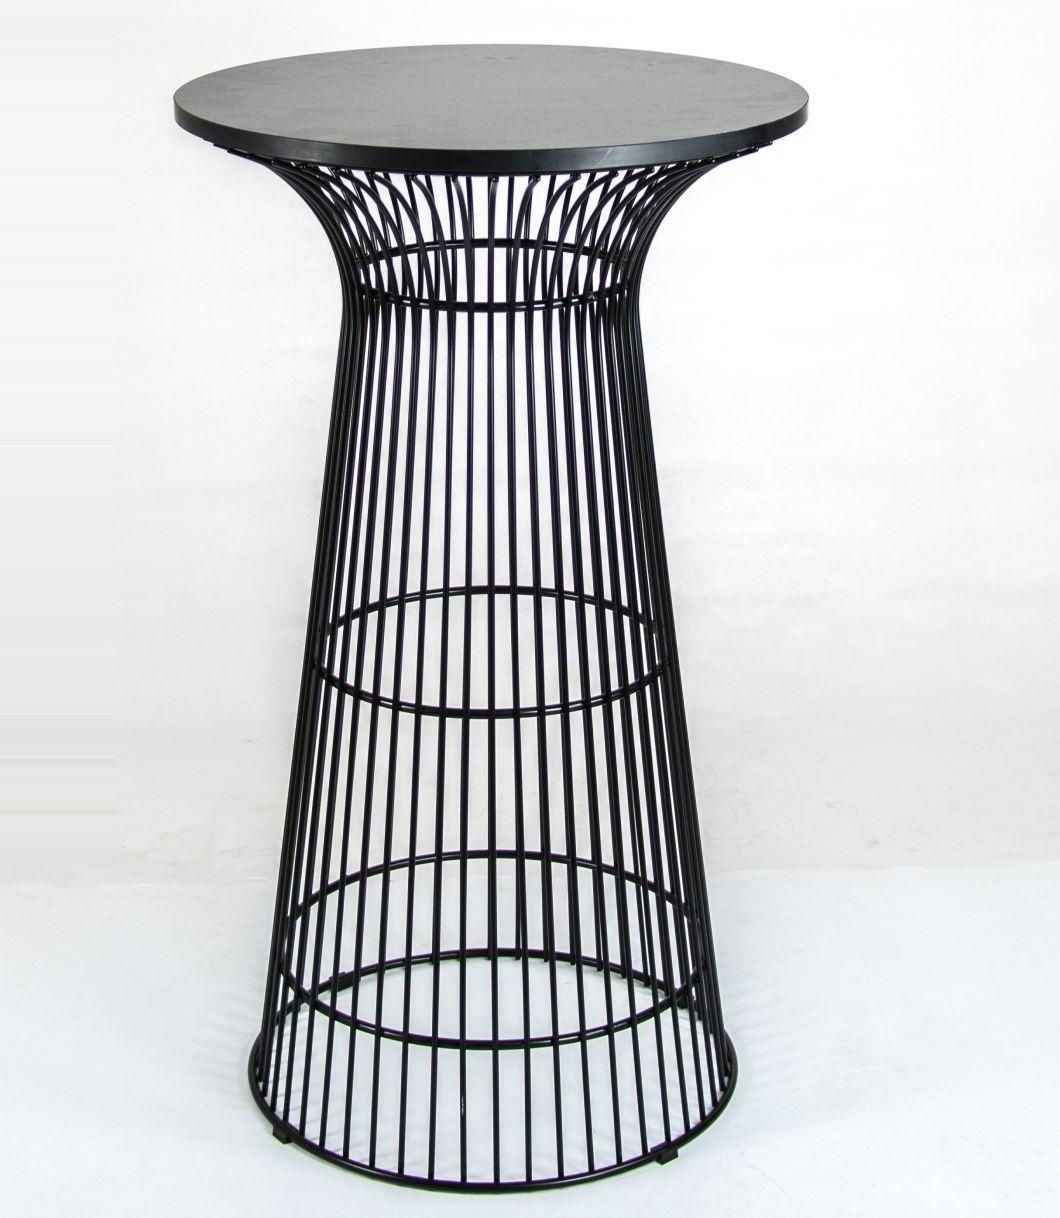 Popular Stackable Painted or Chrome Golden Steel Wire Dining Chair